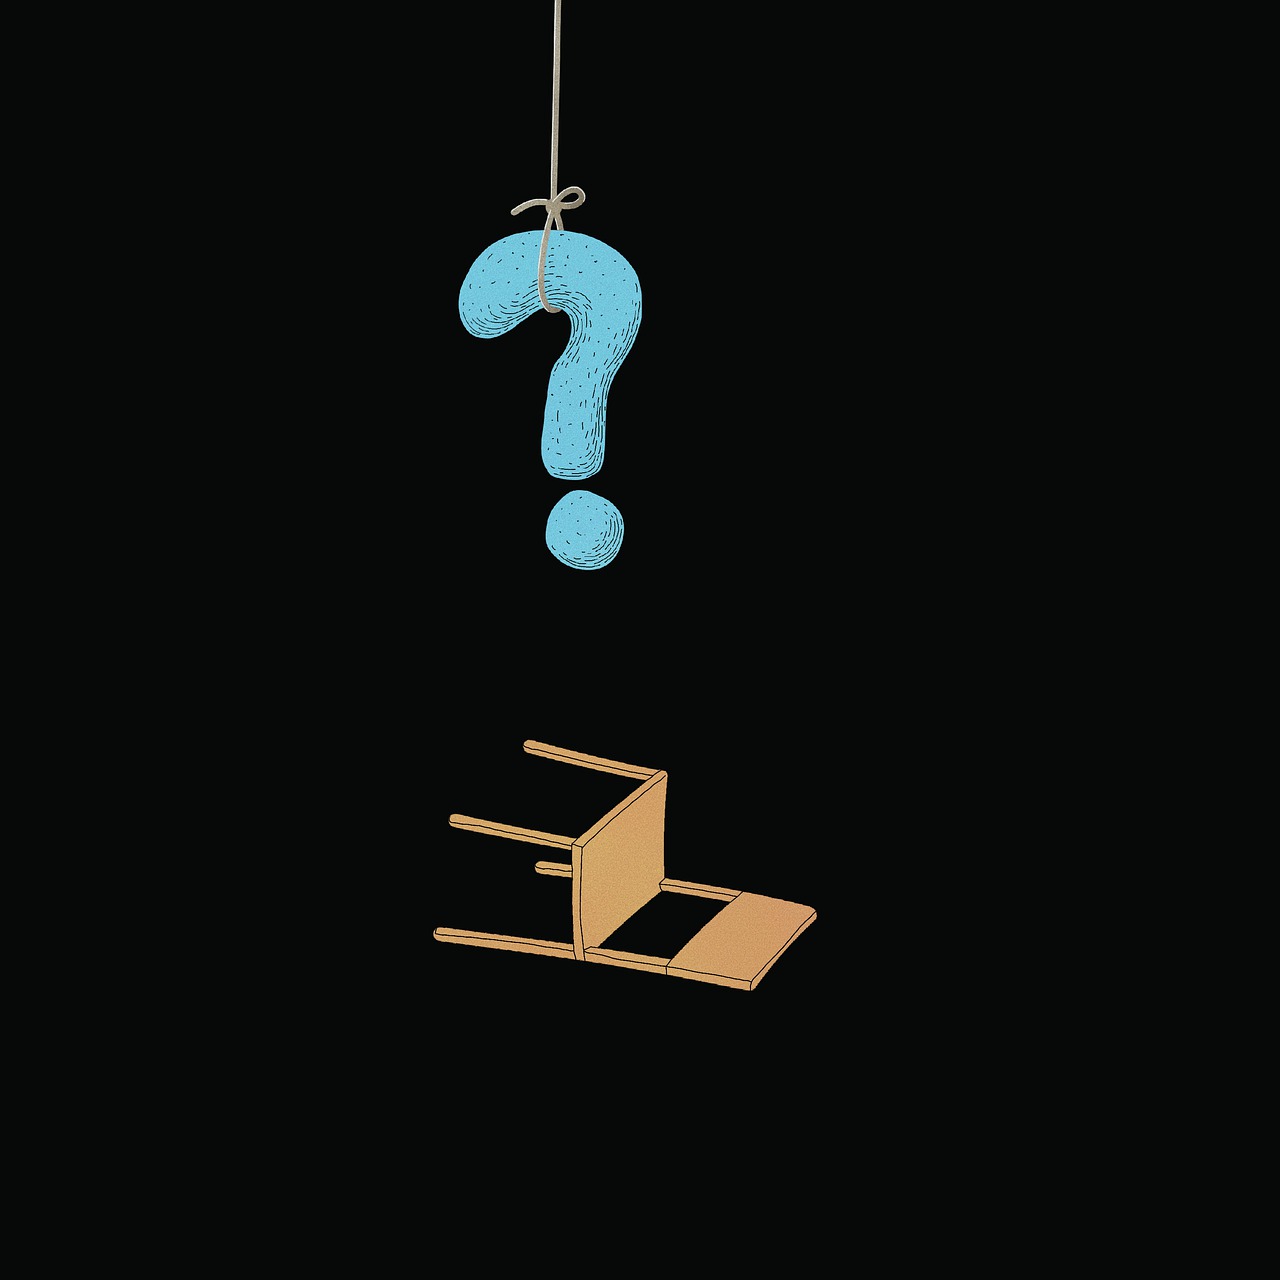 a blue question mark hanging from a hook, an illustration of, by Richard Carline, behance contest winner, conceptual art, with furniture overturned, on a flat color black background, with a wooden stuff, cad